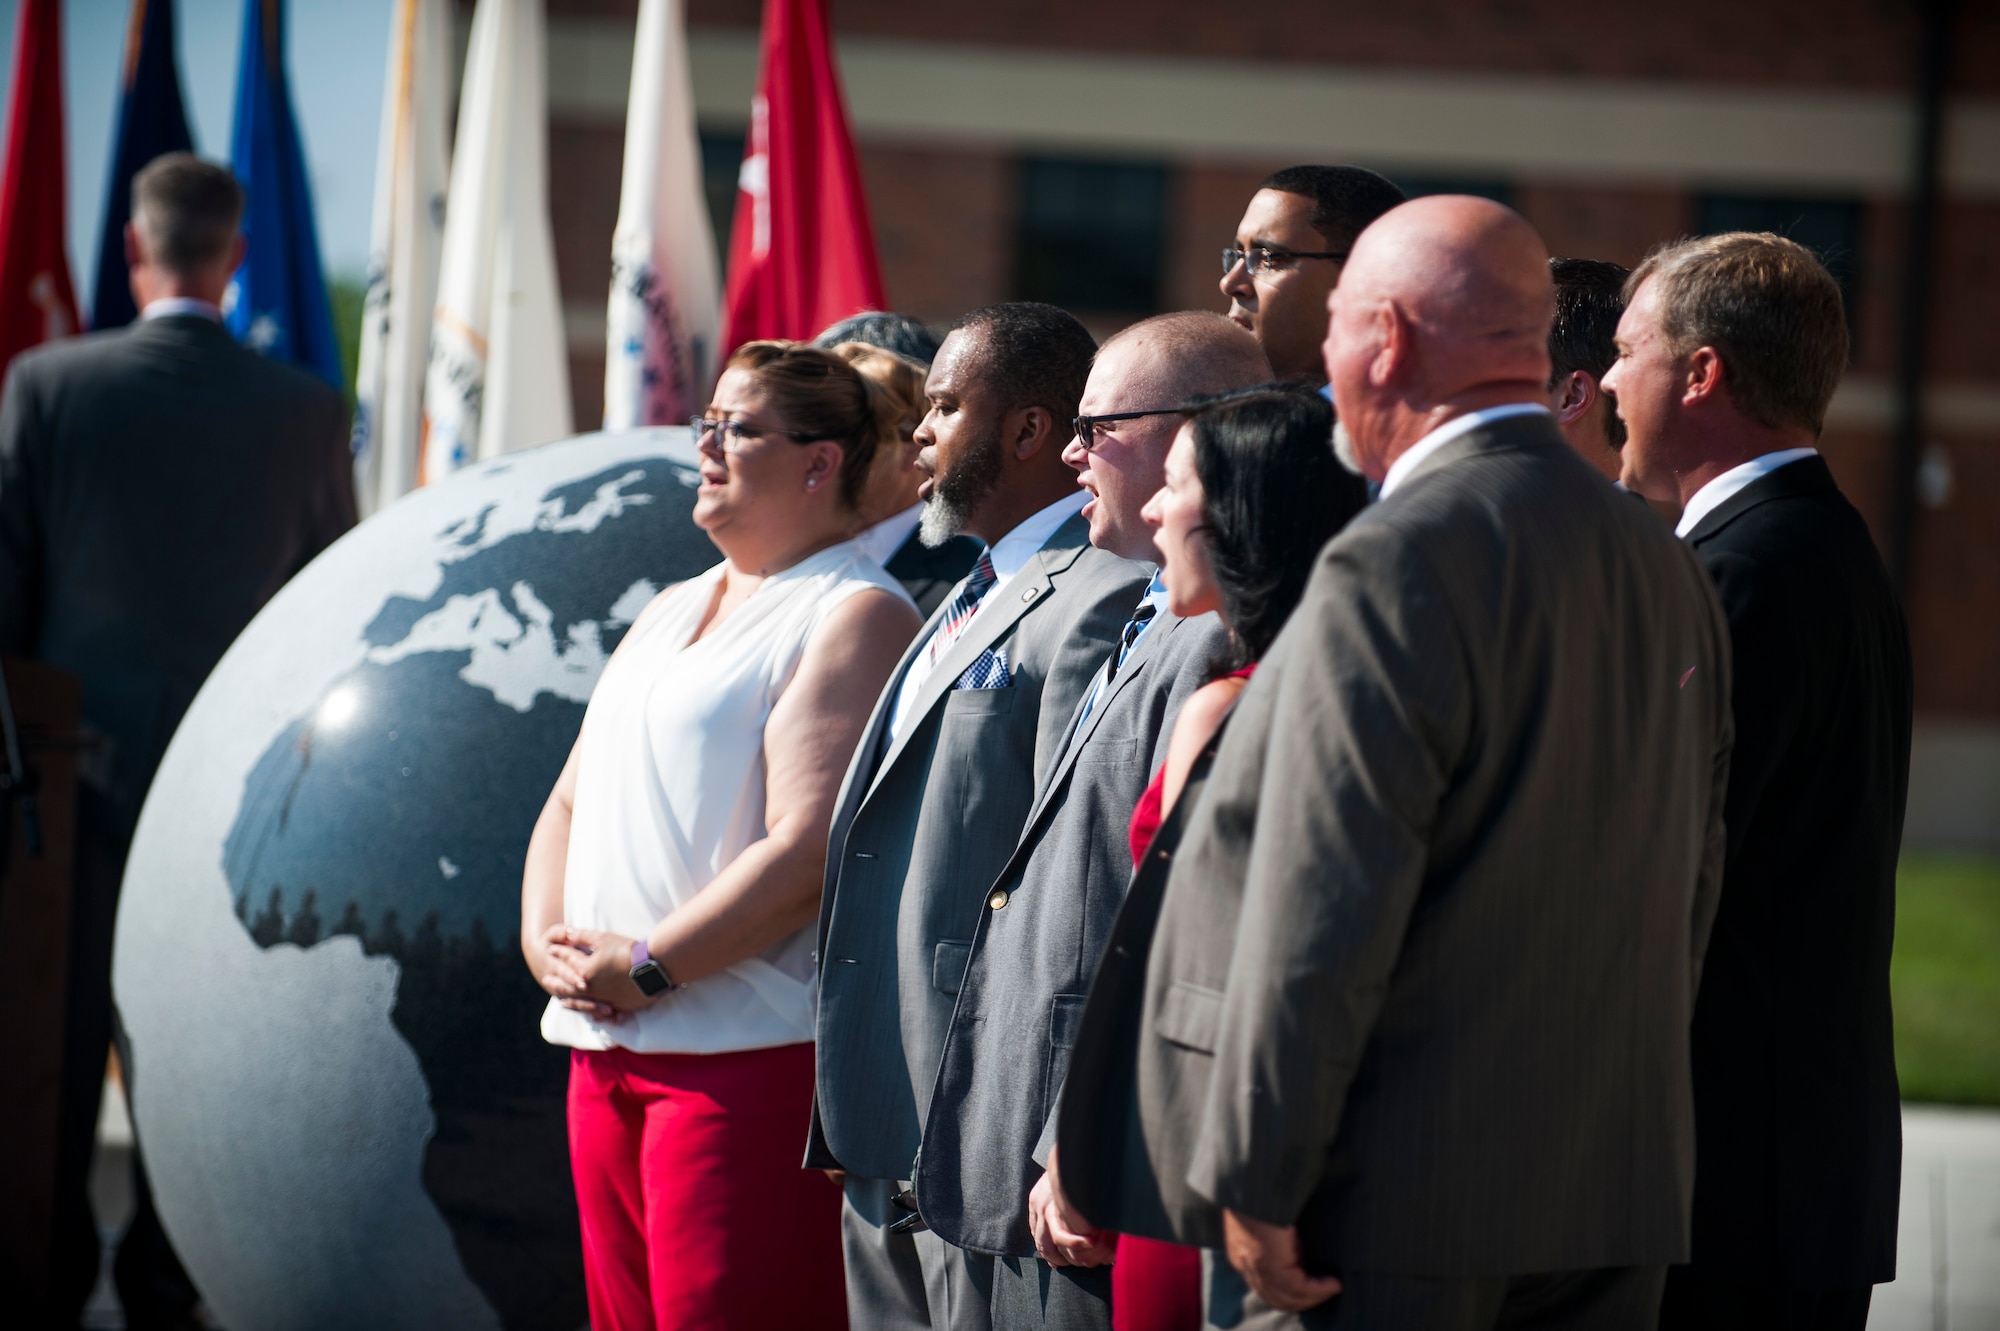 The Defense Information Systems Agency Global Operations Command Choir sings the national anthem during a ribbon cutting ceremony for the new DISA compound at Scott Air Force Base, Ill., Aug. 11, 2016. DISA Global is the nation's premier cyber protection division and executes global mission support and emergency response coordination. (U.S. Air Force photo by Staff Sgt. Clayton Lenhardt/Released)